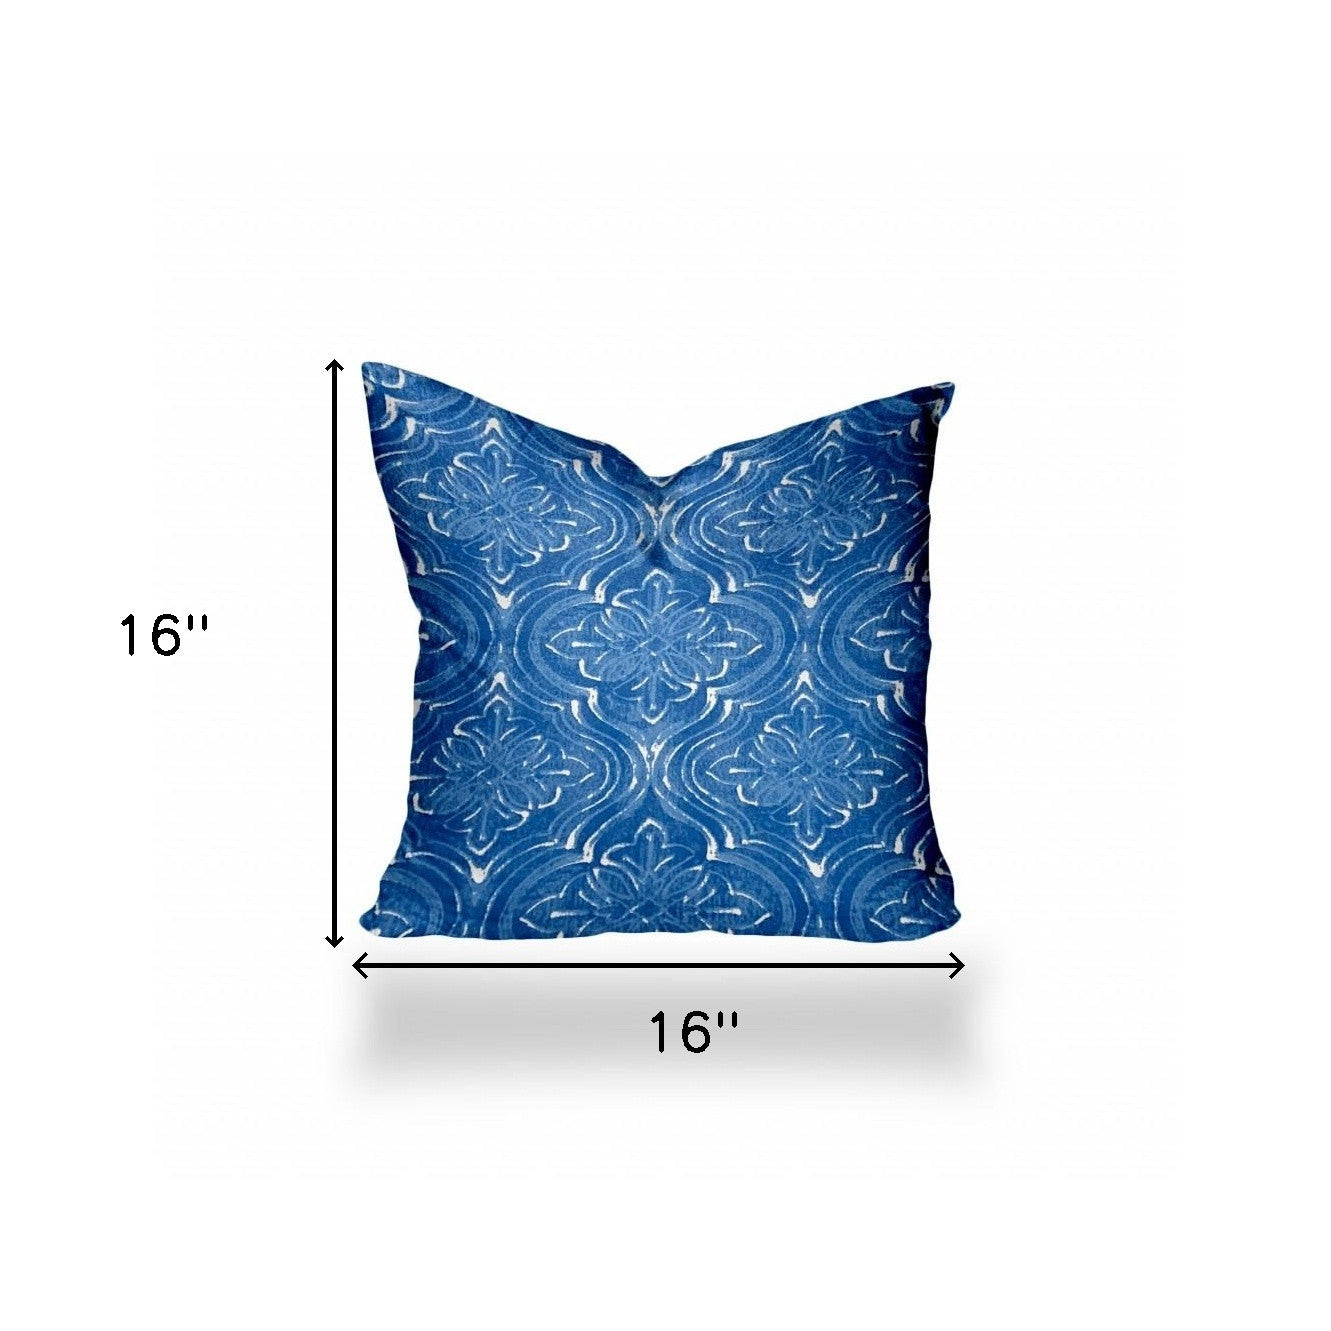 16" X 16" Blue And White Enveloped Ikat Throw Indoor Outdoor Pillow